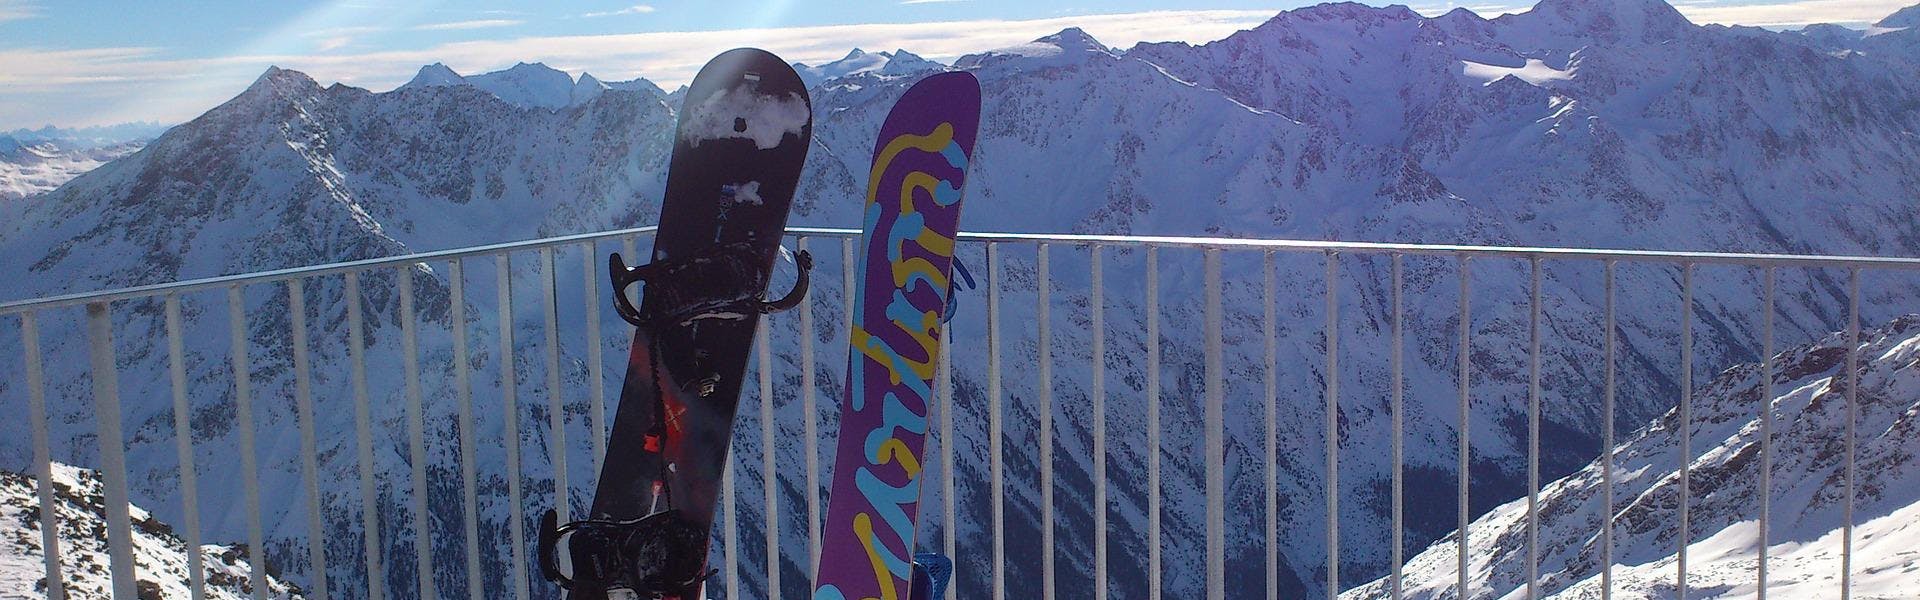 Two snowboards rest against a railing with mountains in the background.